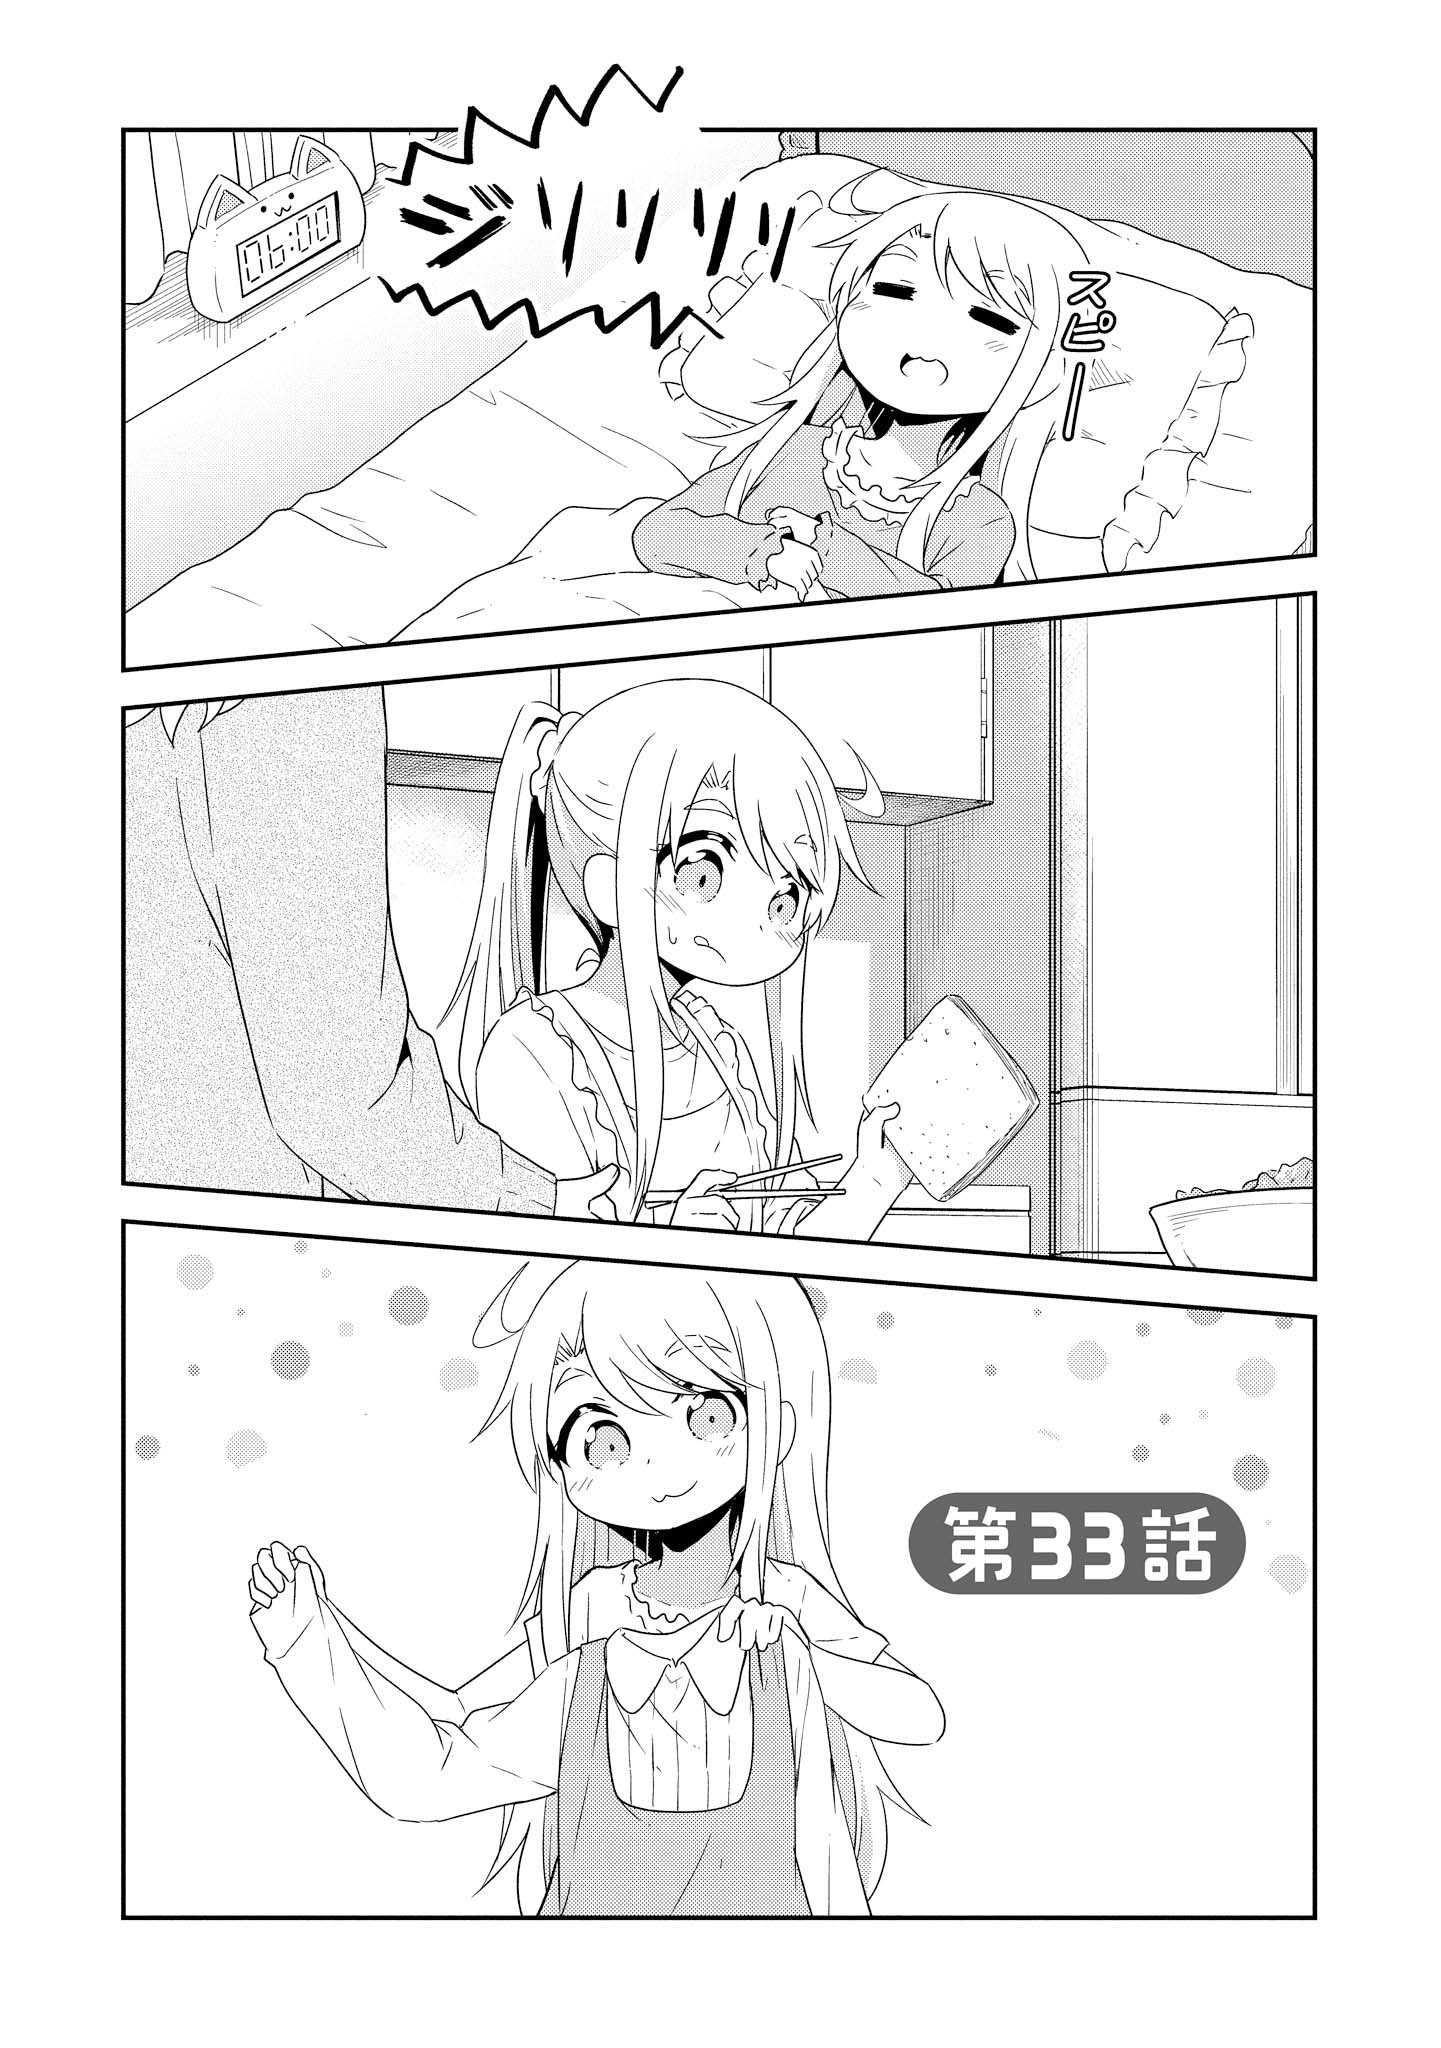 Wataten! An Angel Flew Down to Me 私に天使が舞い降りた！ 第33話 - Page 2